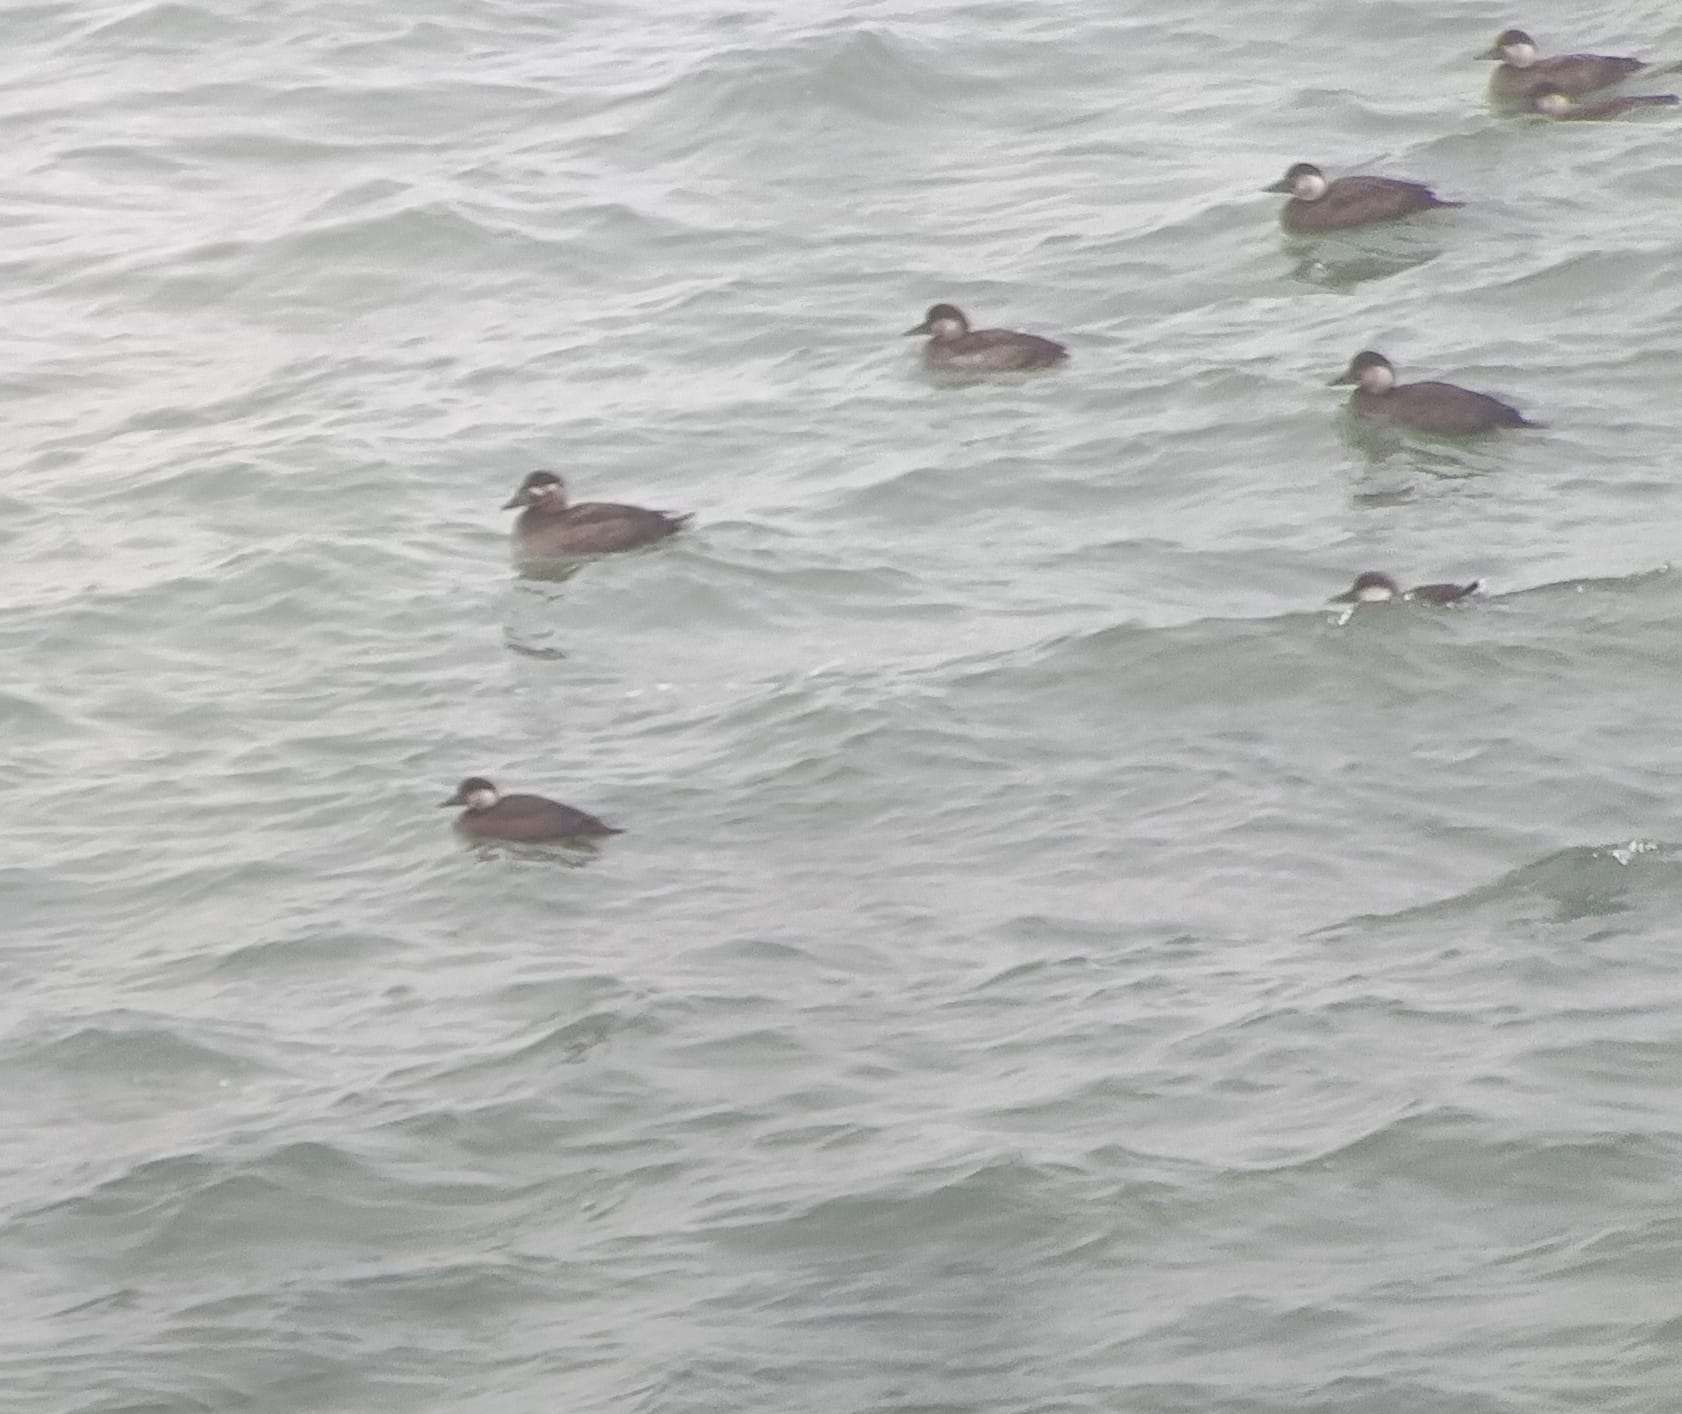 Surf Scoter off Baggy Point